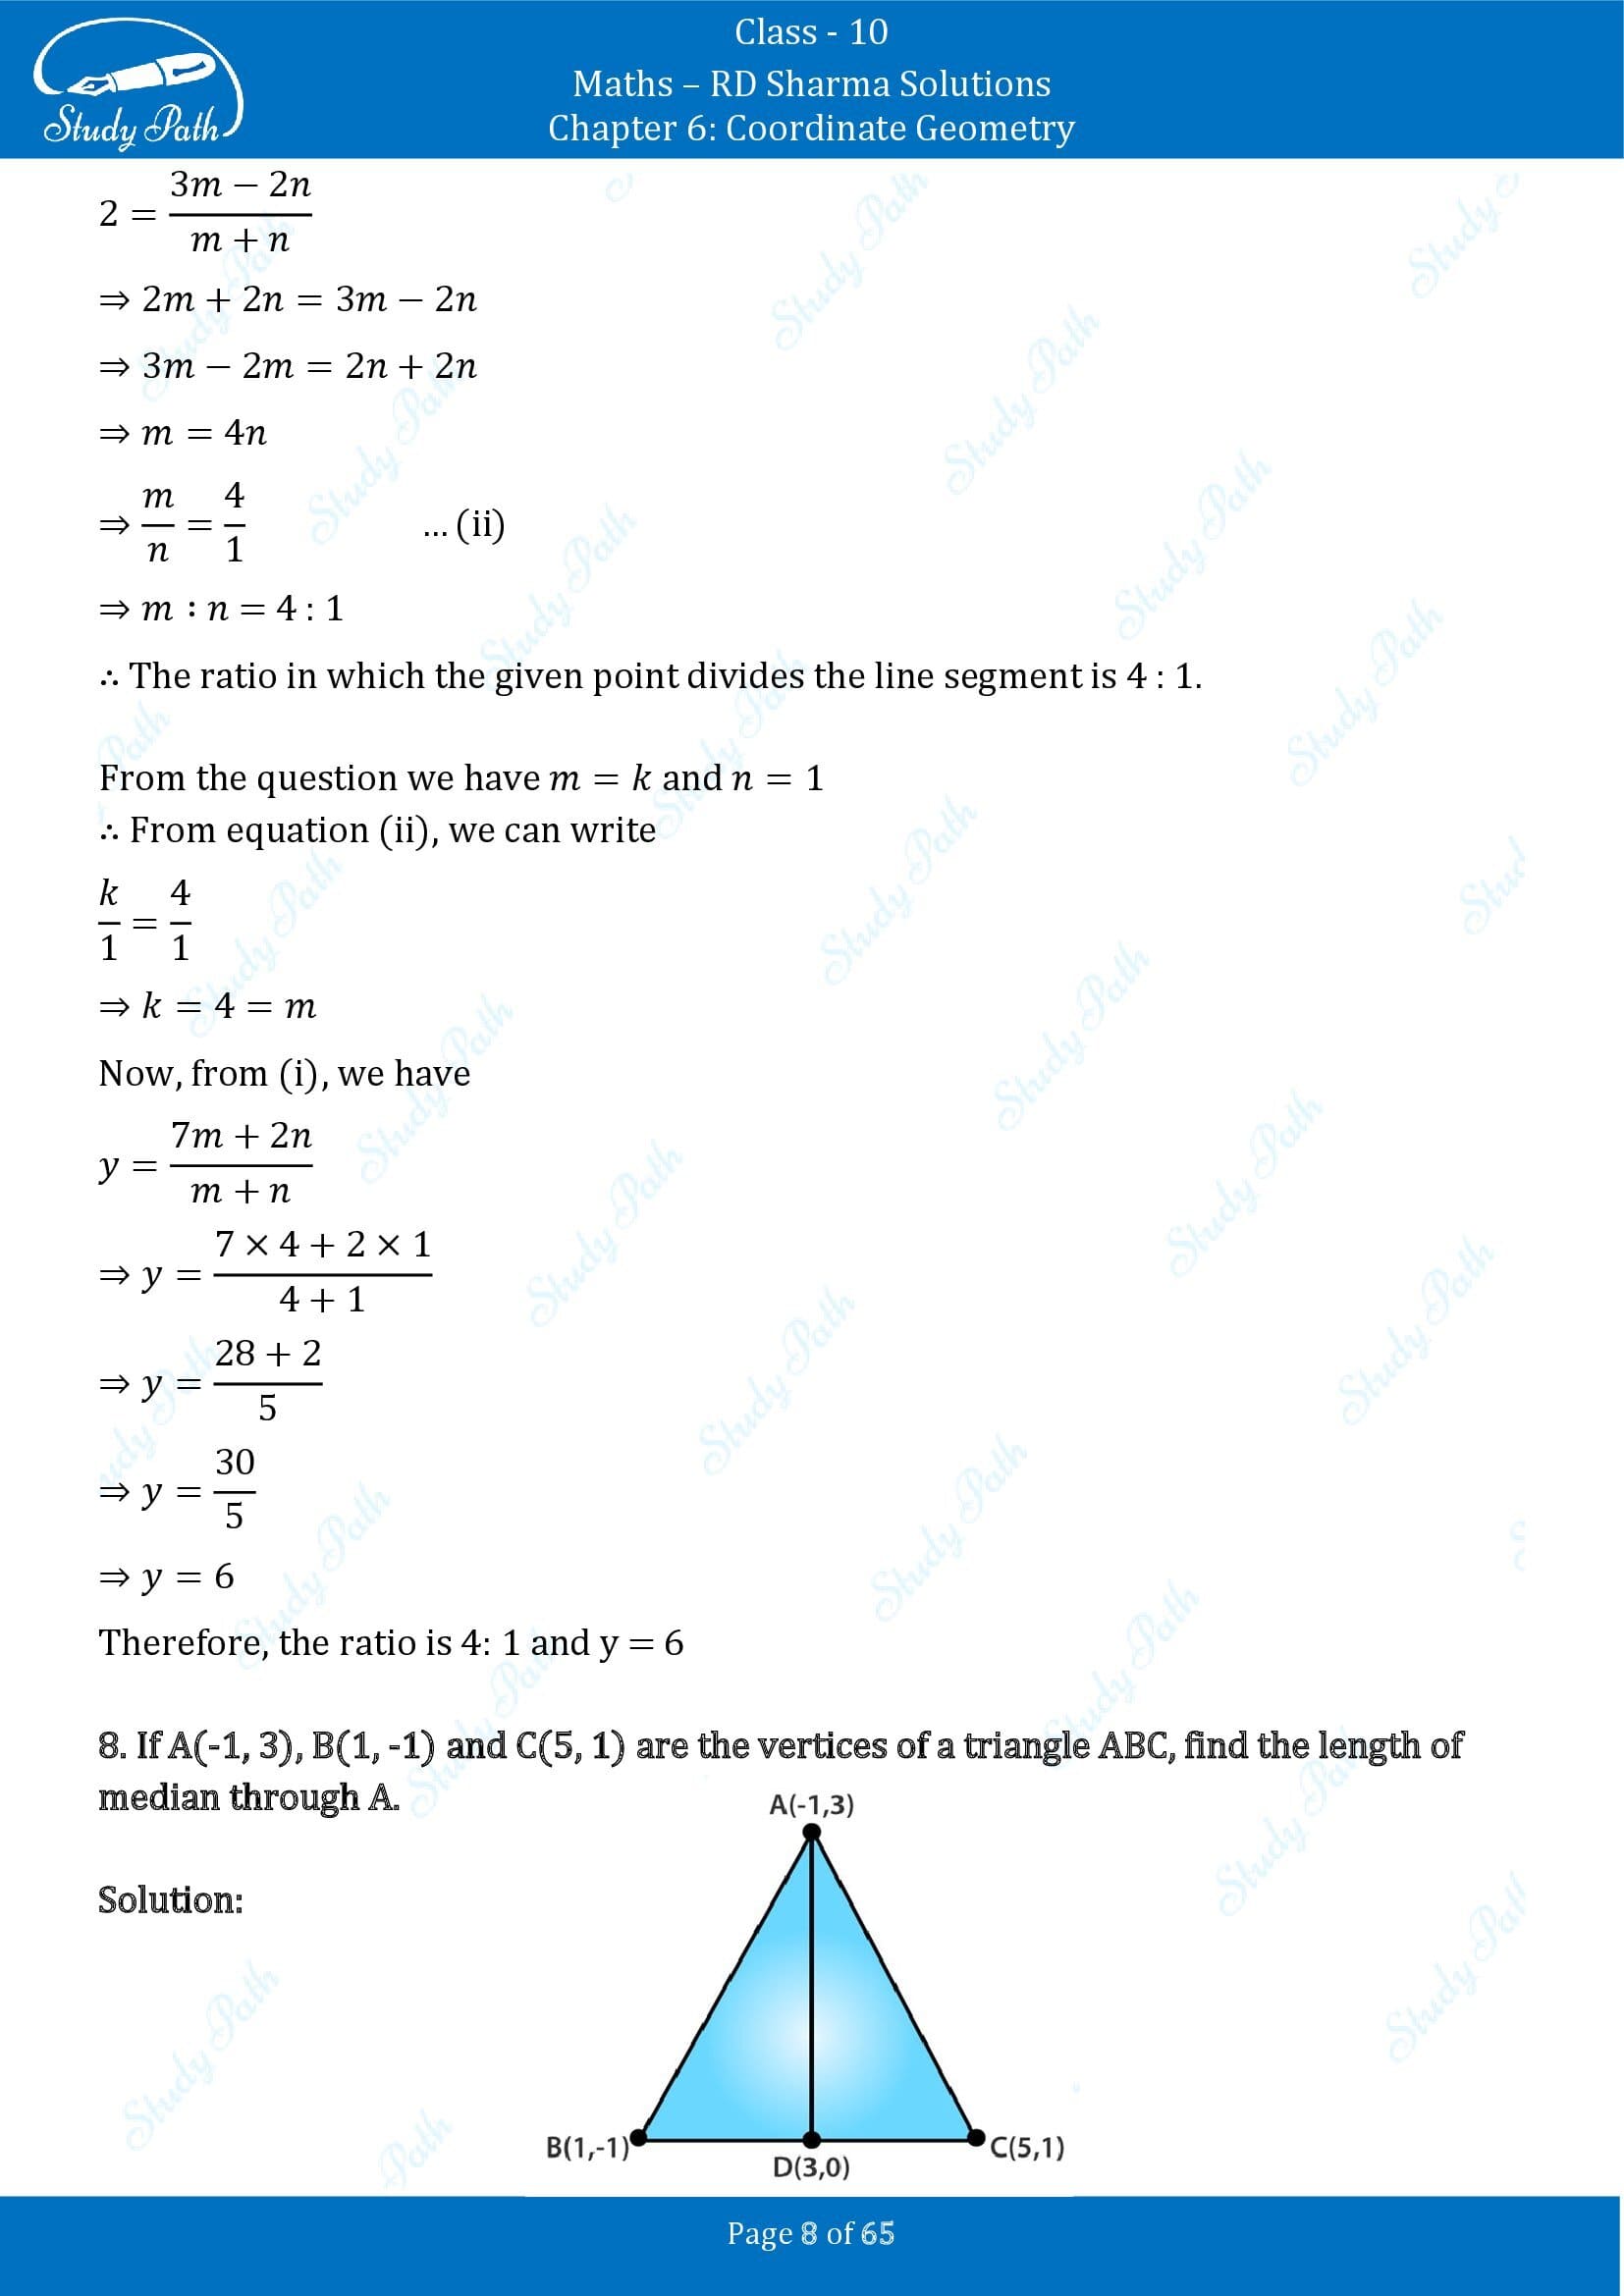 RD Sharma Solutions Class 10 Chapter 6 Coordinate Geometry Exercise 6.3 00008